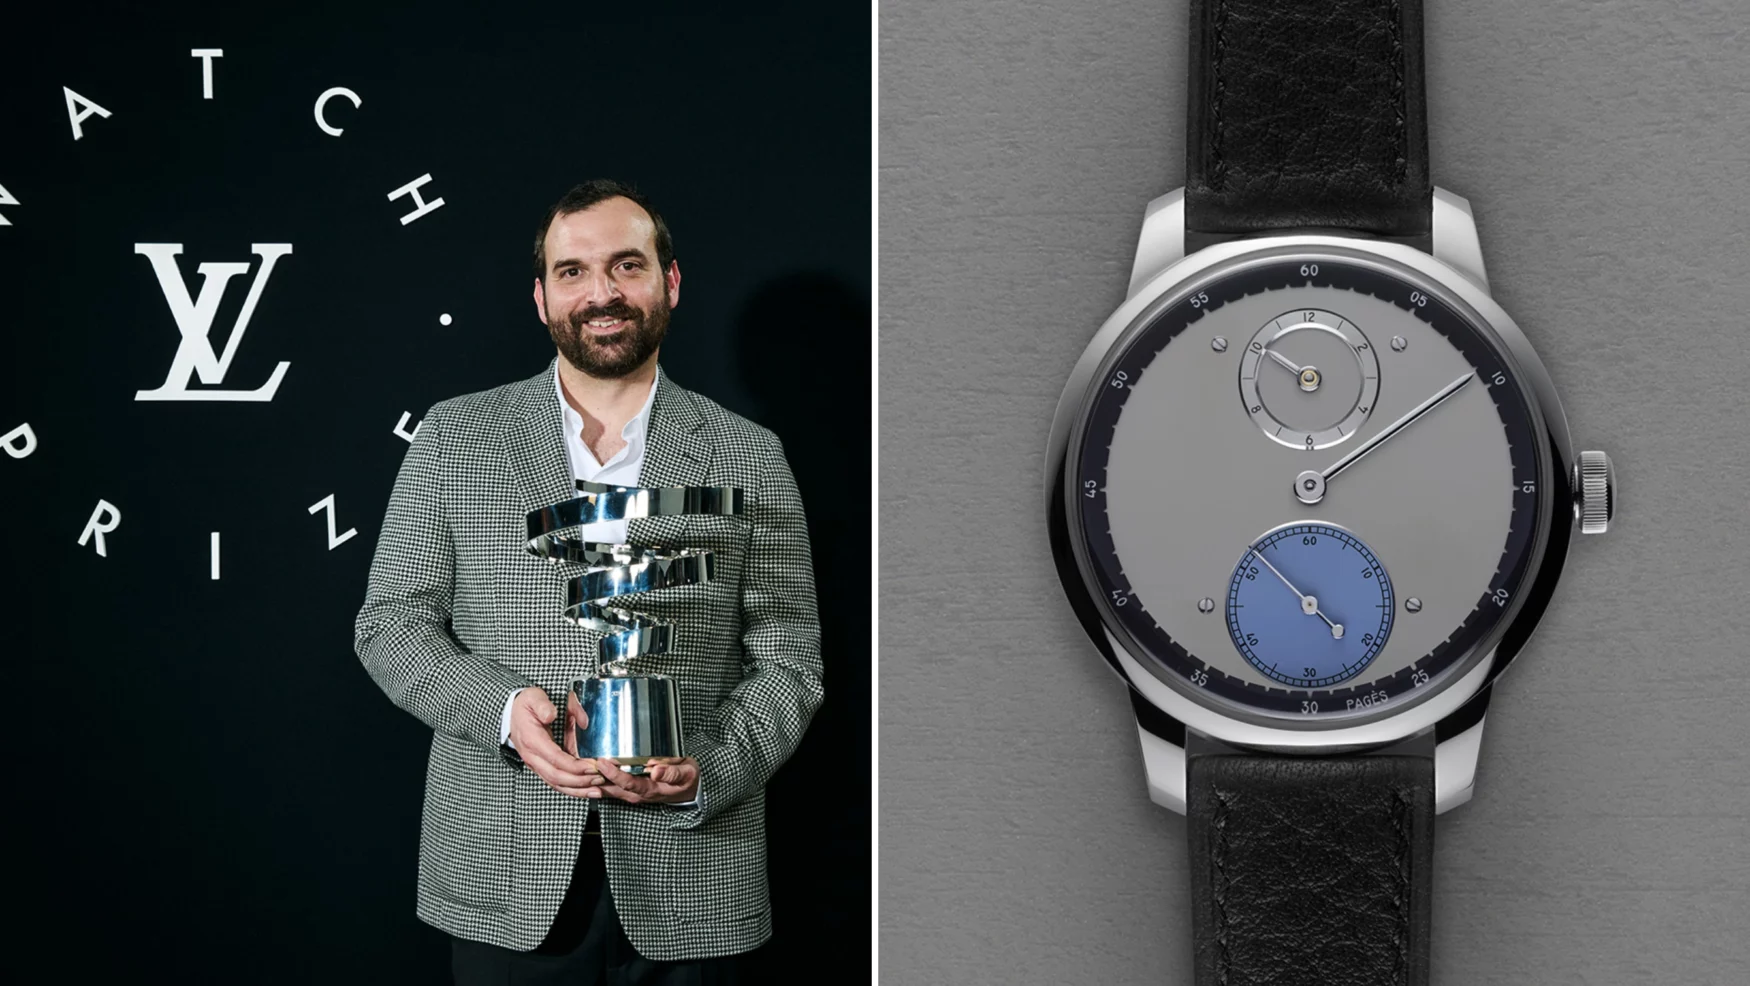 Raúl Pagès wins the first-ever Louis Vuitton Watch Prize for Independent Creatives